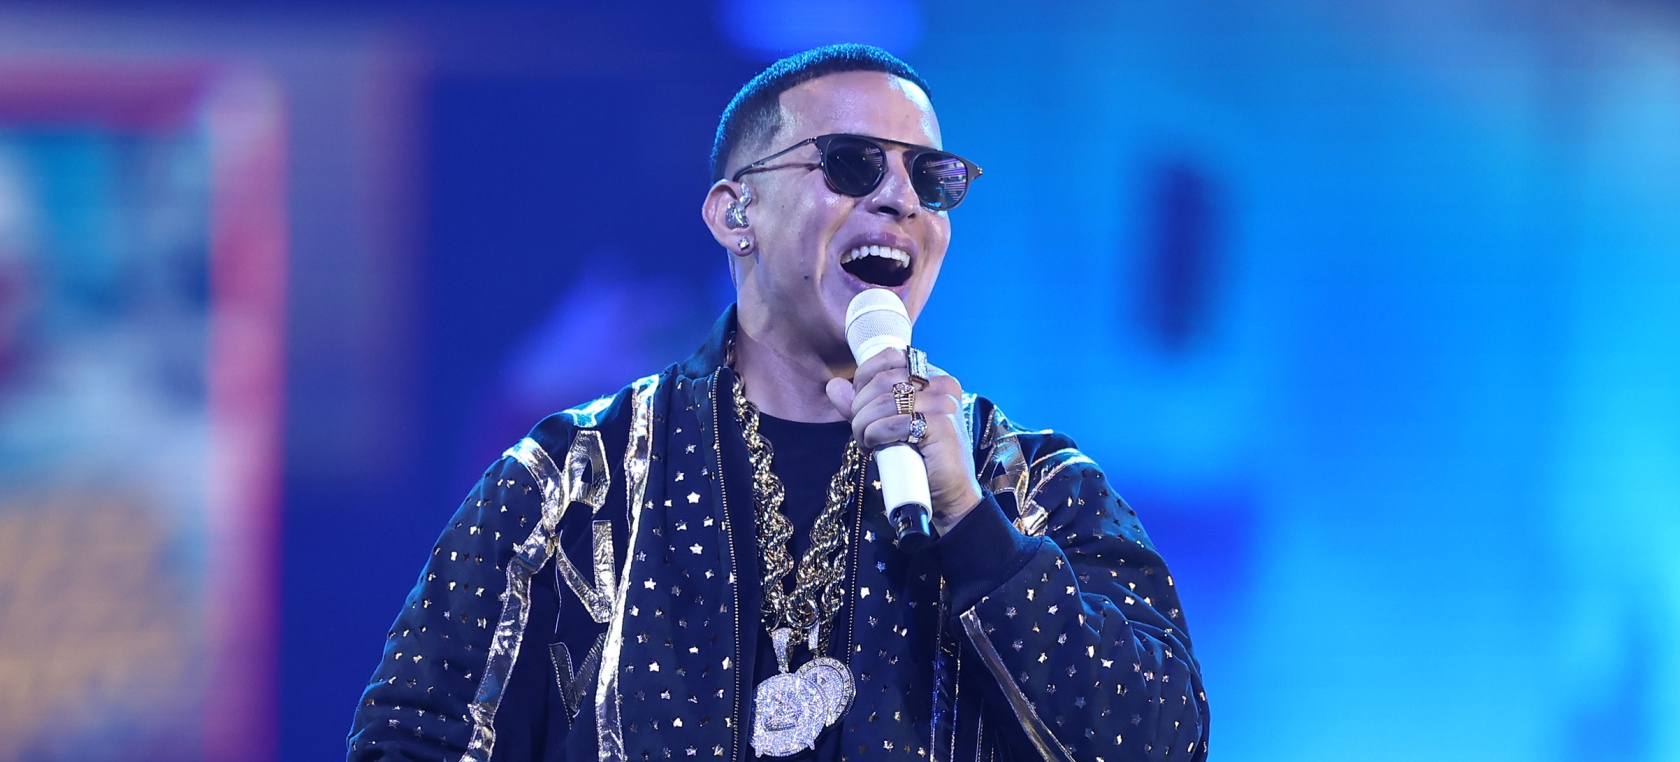 Mireddys González, Daddy Yankee’s wife, shared her feelings about her husband’s retirement